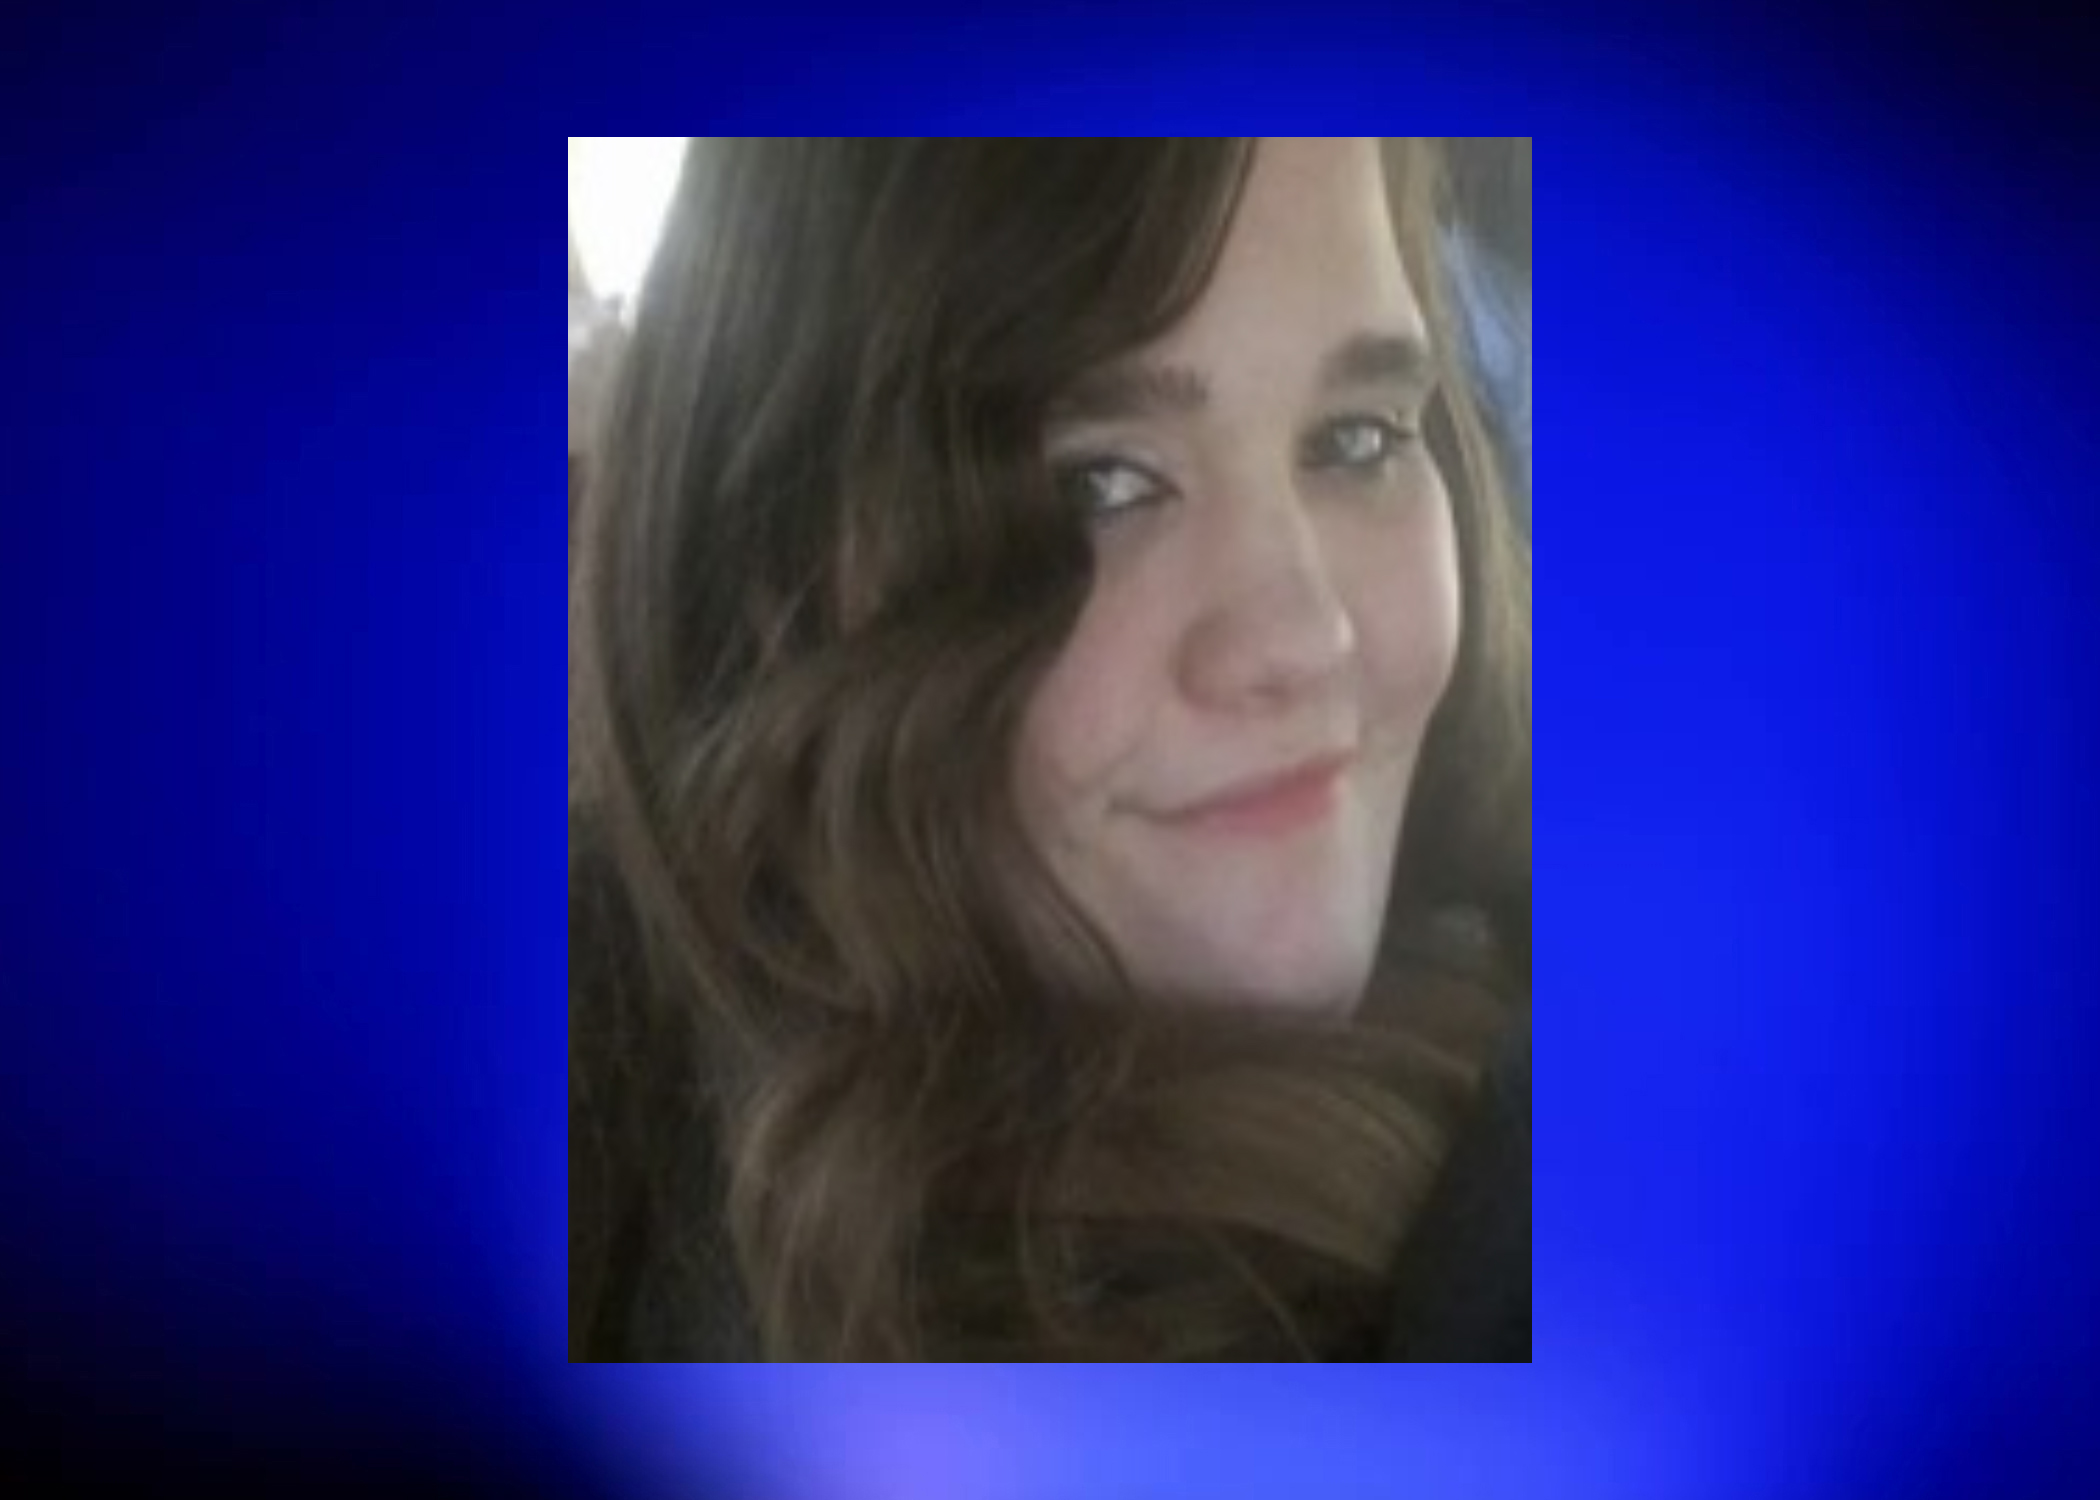 UPDATE: Missing Tallapoosa County teen found safe